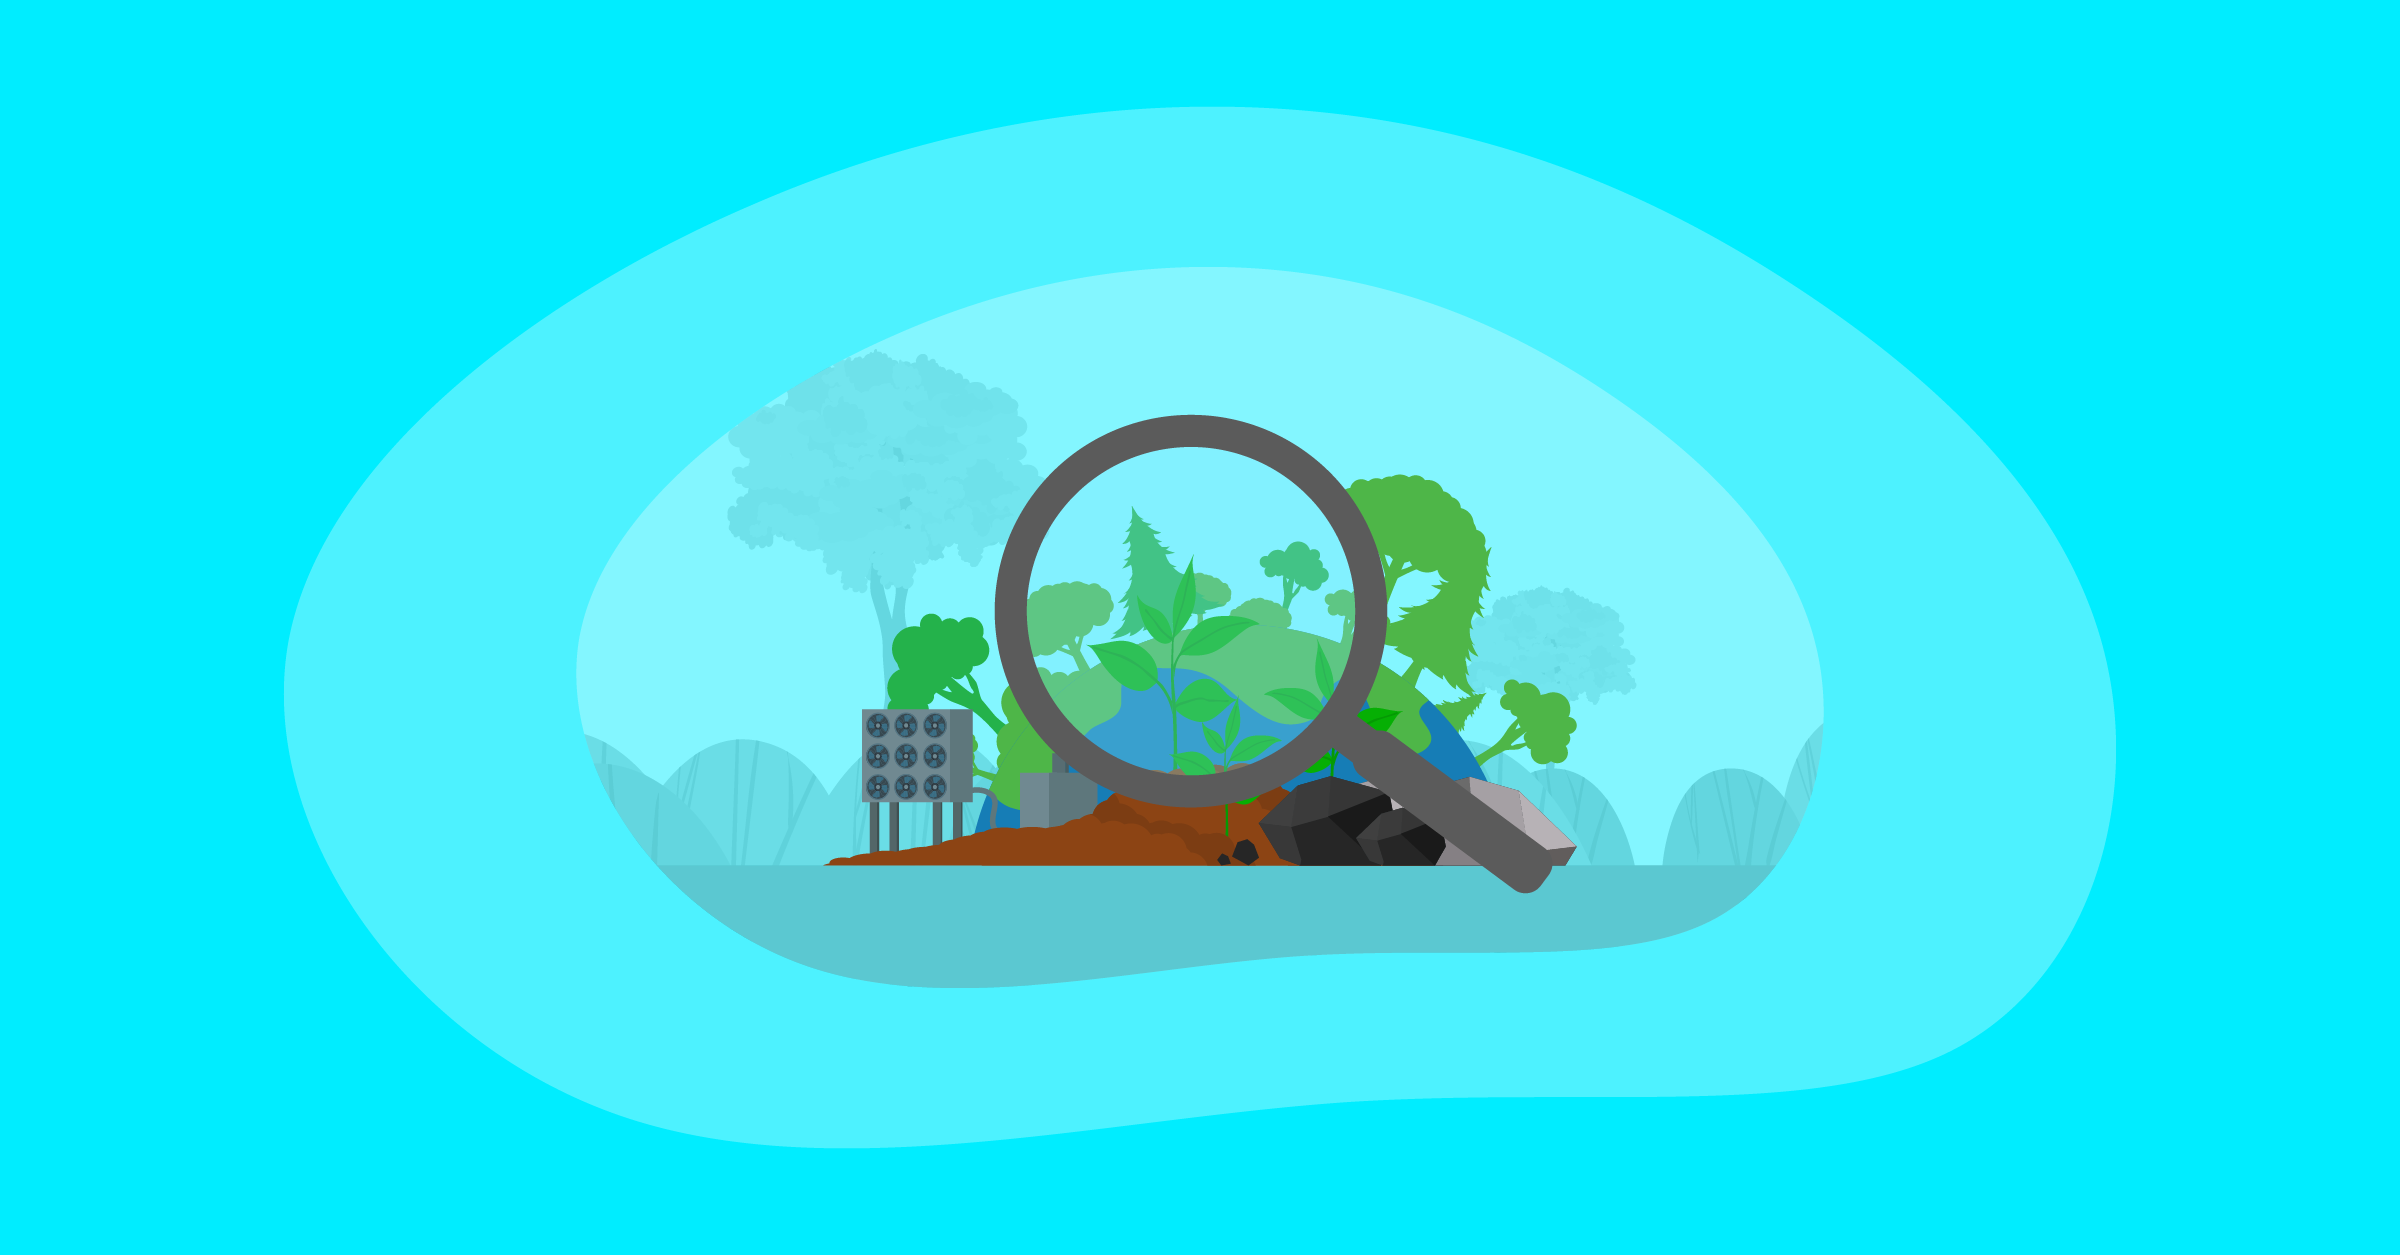 Illustration of a climate positive environment under a magnifying glass